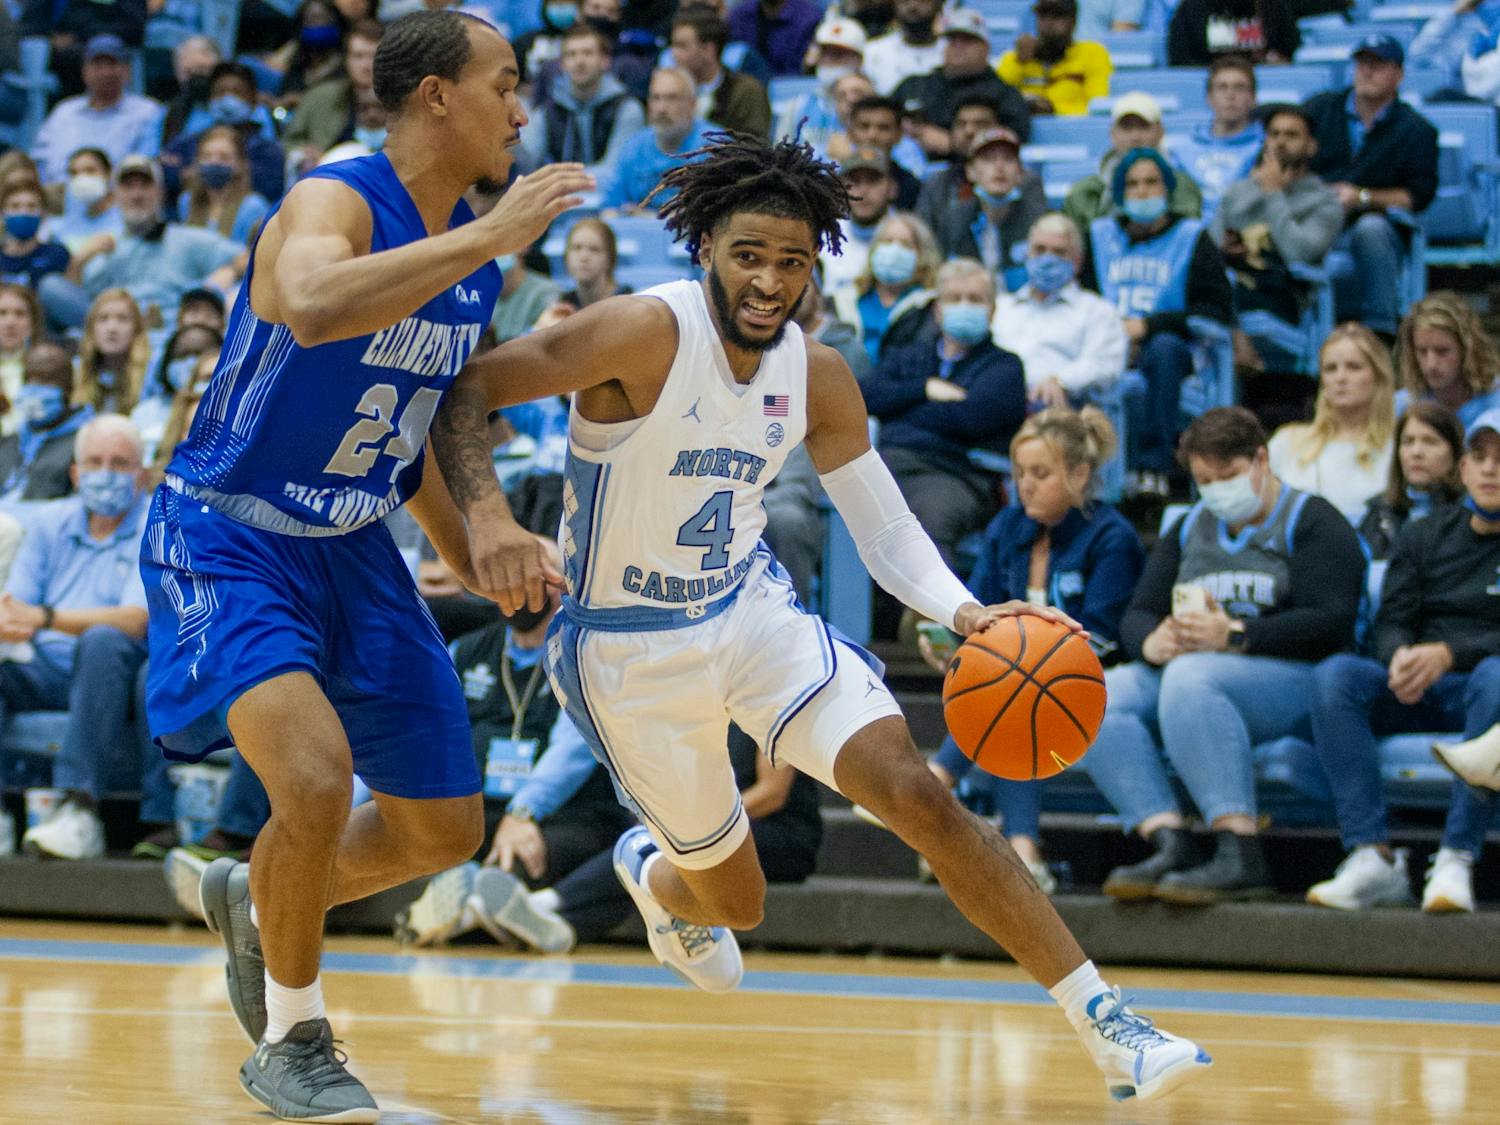 Sophomore guard RJ Davis (4) runs with the ball at the exhibition game against Elizabeth City State on Nov. 5 at the Dean E. Smith Center. UNC won 83-55.